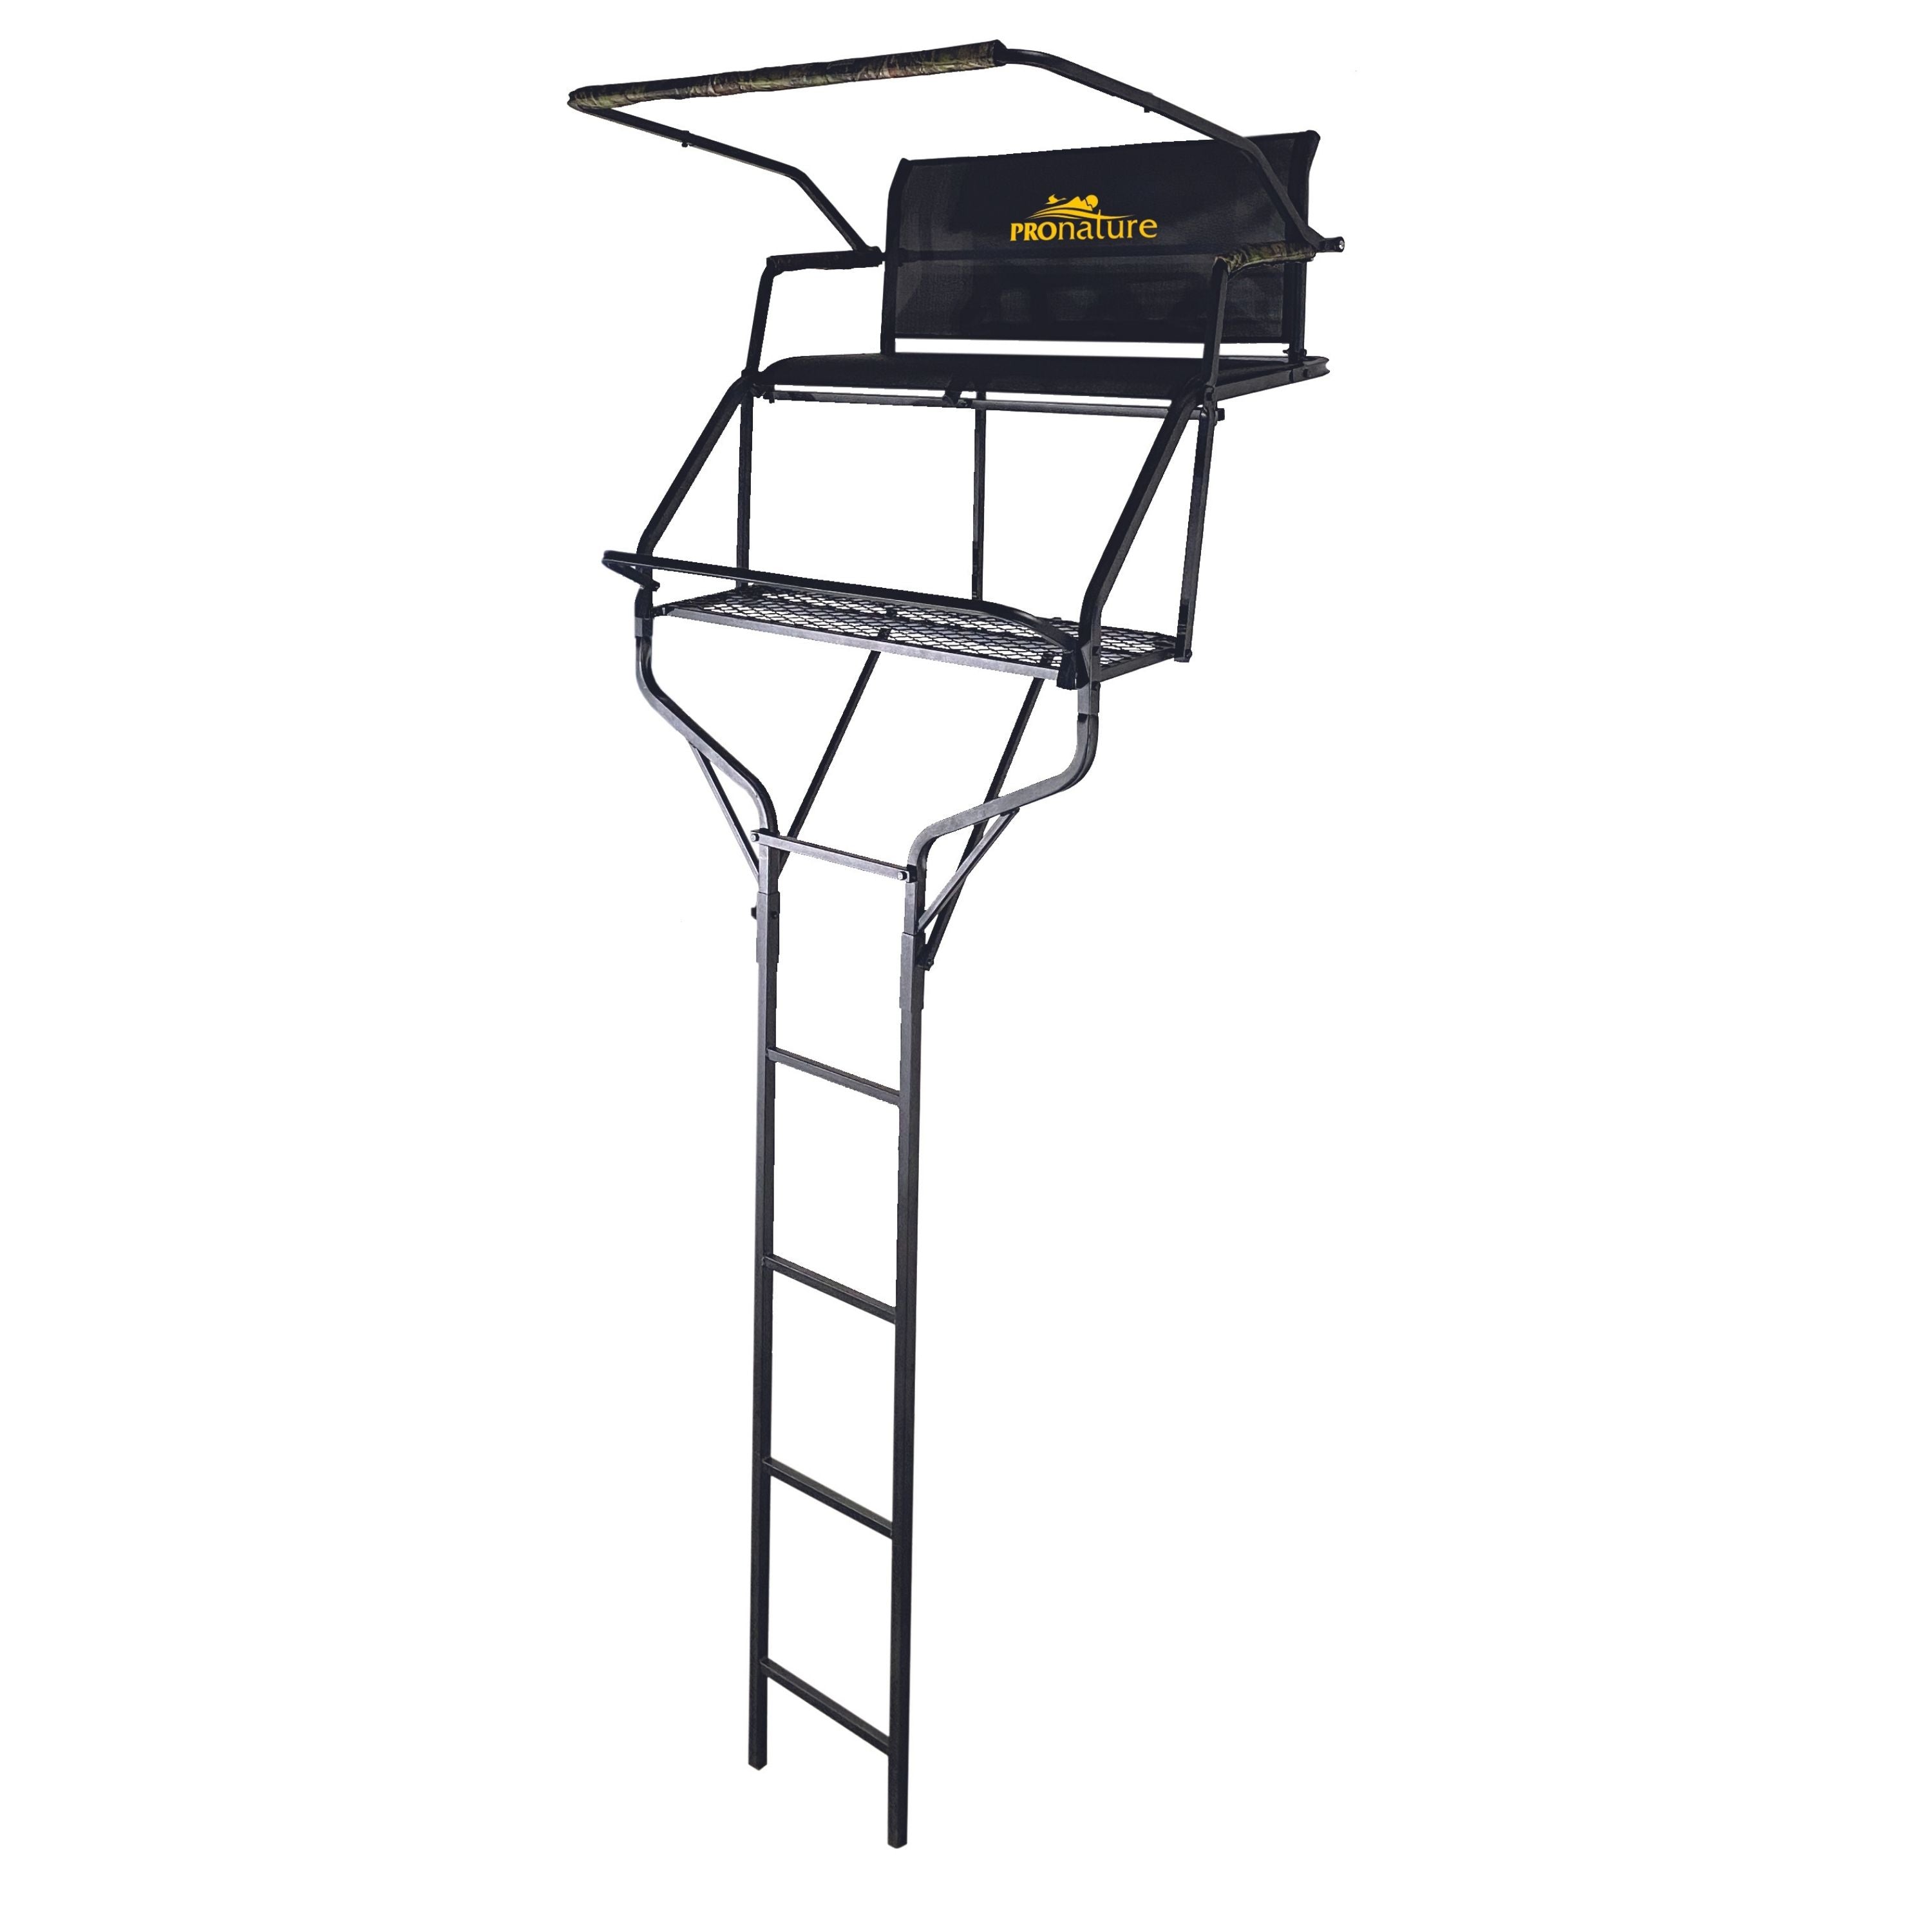 Hunting treestand - 2 person